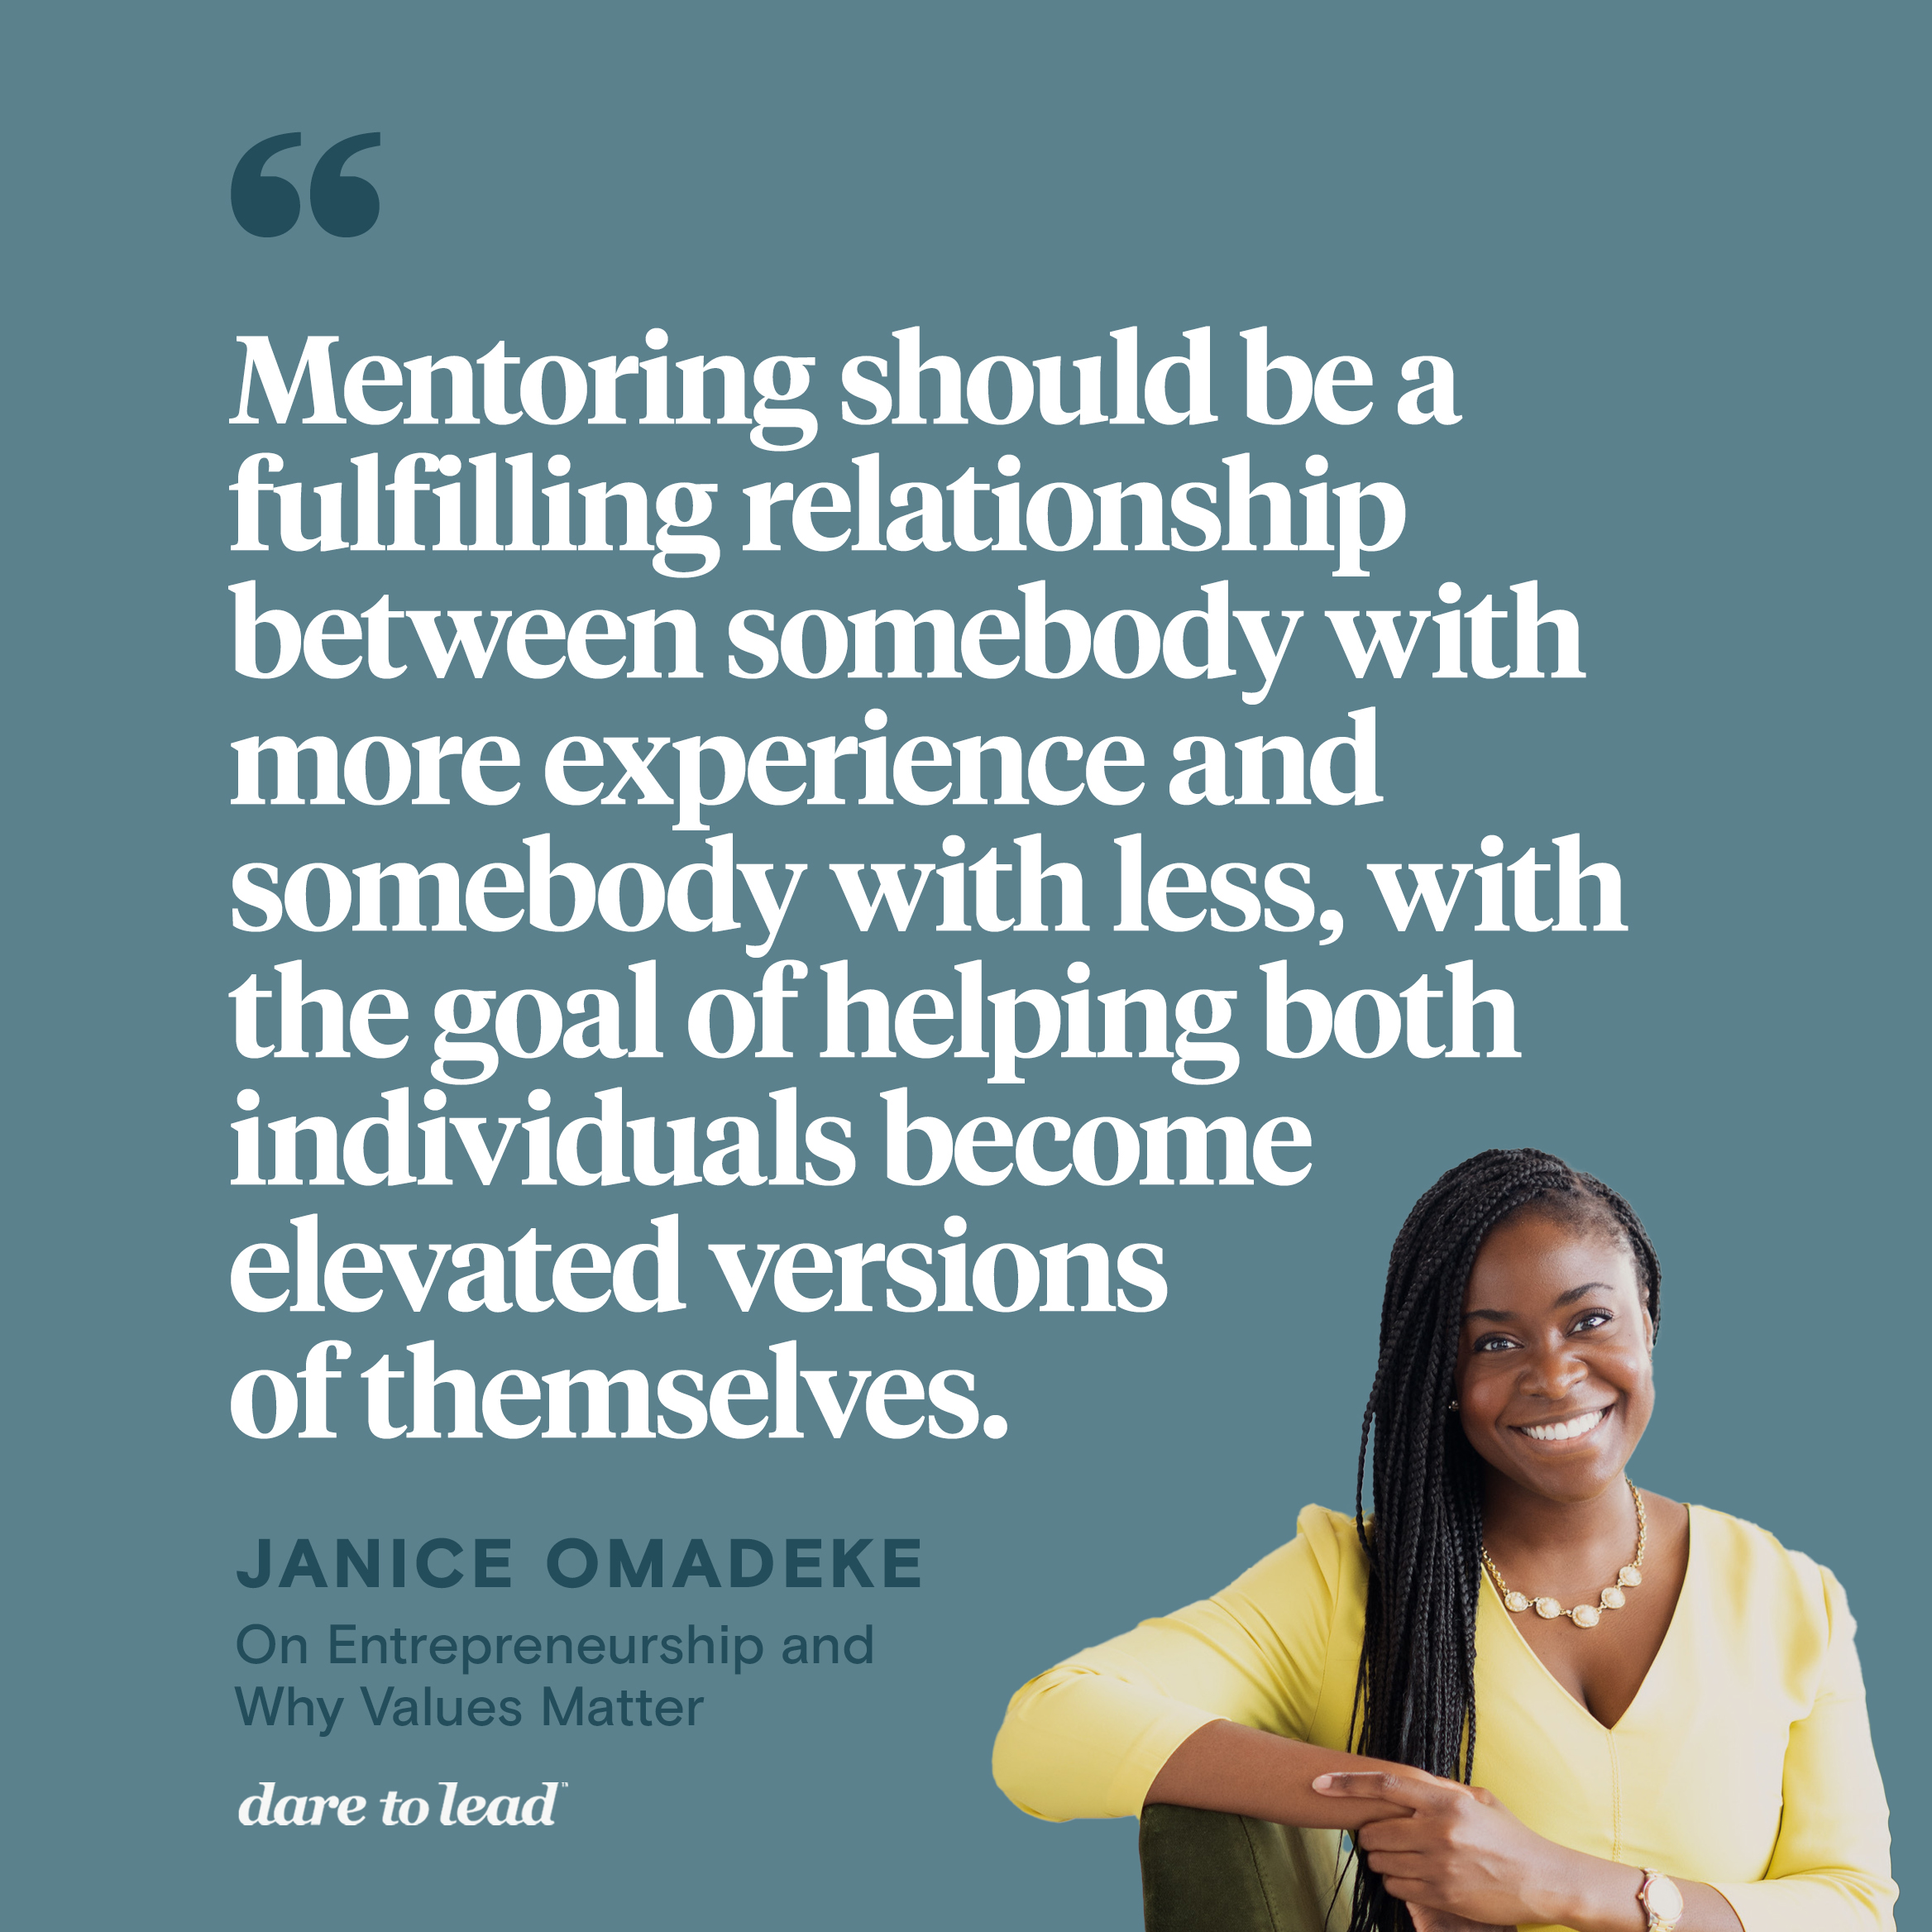 A quote from Janice Omadeke, the founder of The Mentor Method: Mentoring should be a fulfilling relationship between somebody with more experience and somebody with less, with the goal of helping both individuals become elevated versions of themselves.